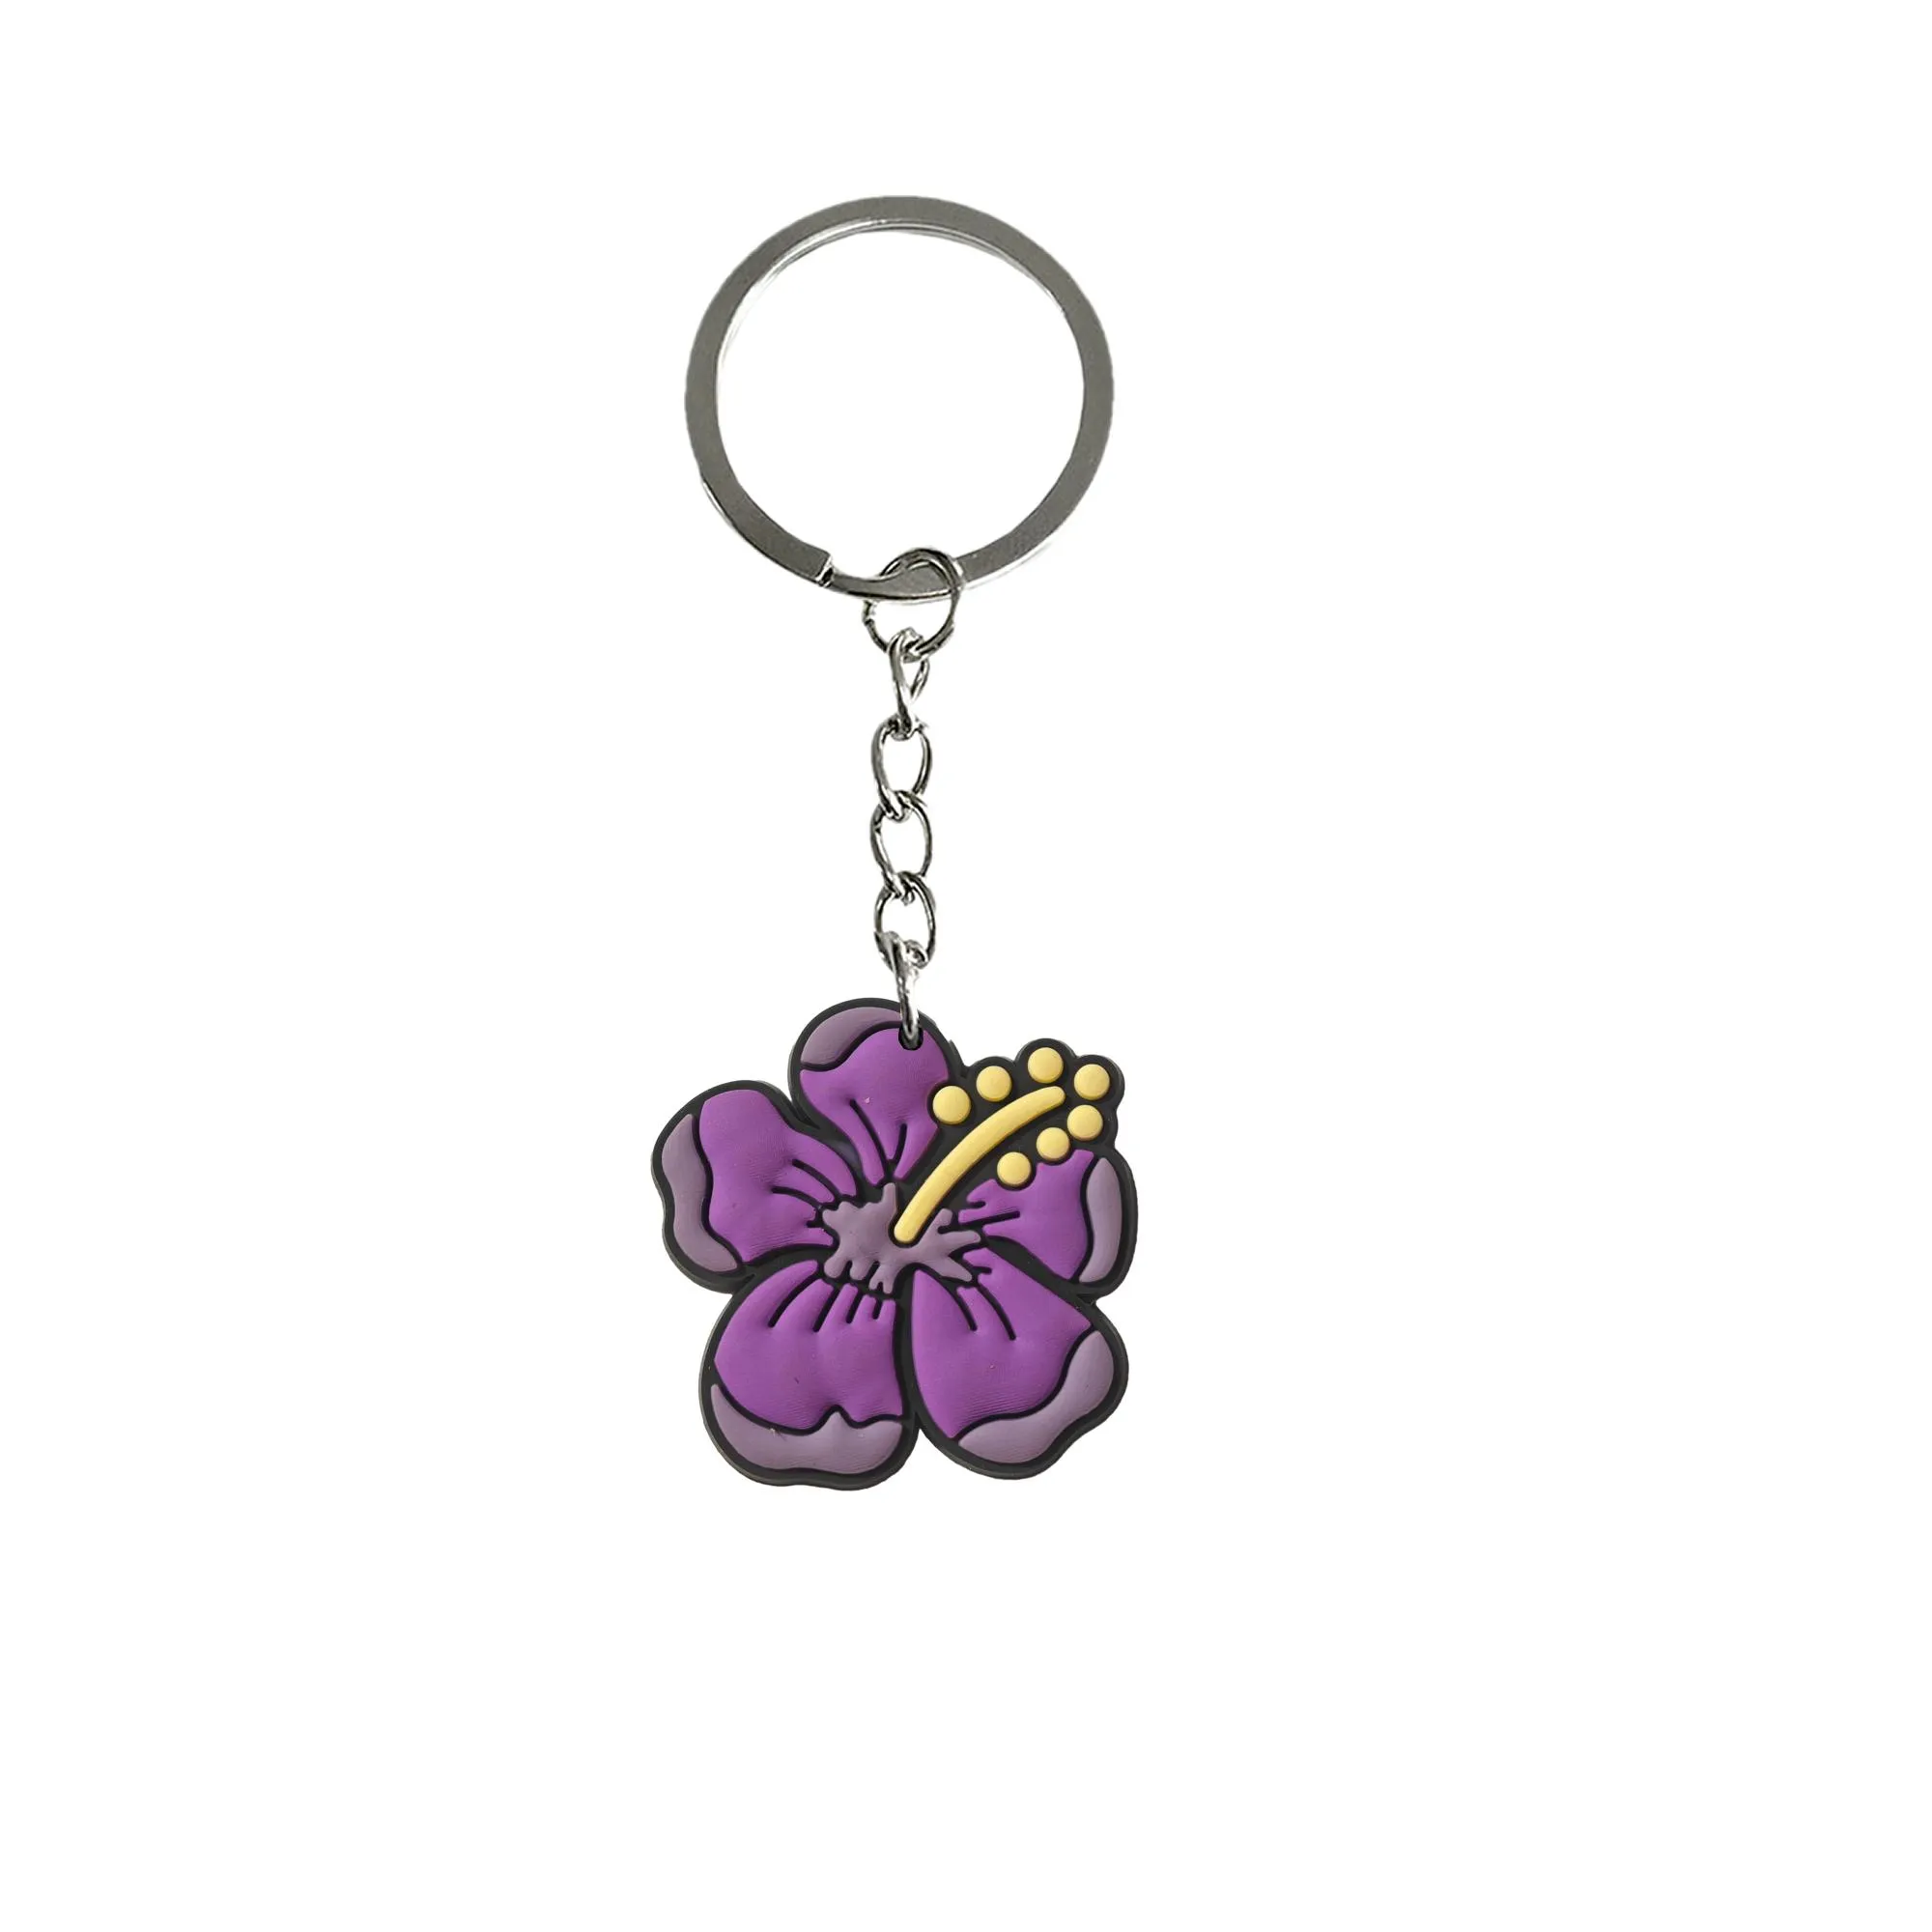 pentapetal flower keychain for goodie bag stuffers supplies keychains girls boys keyring suitable schoolbag backpack car charms women school day birthday party gift